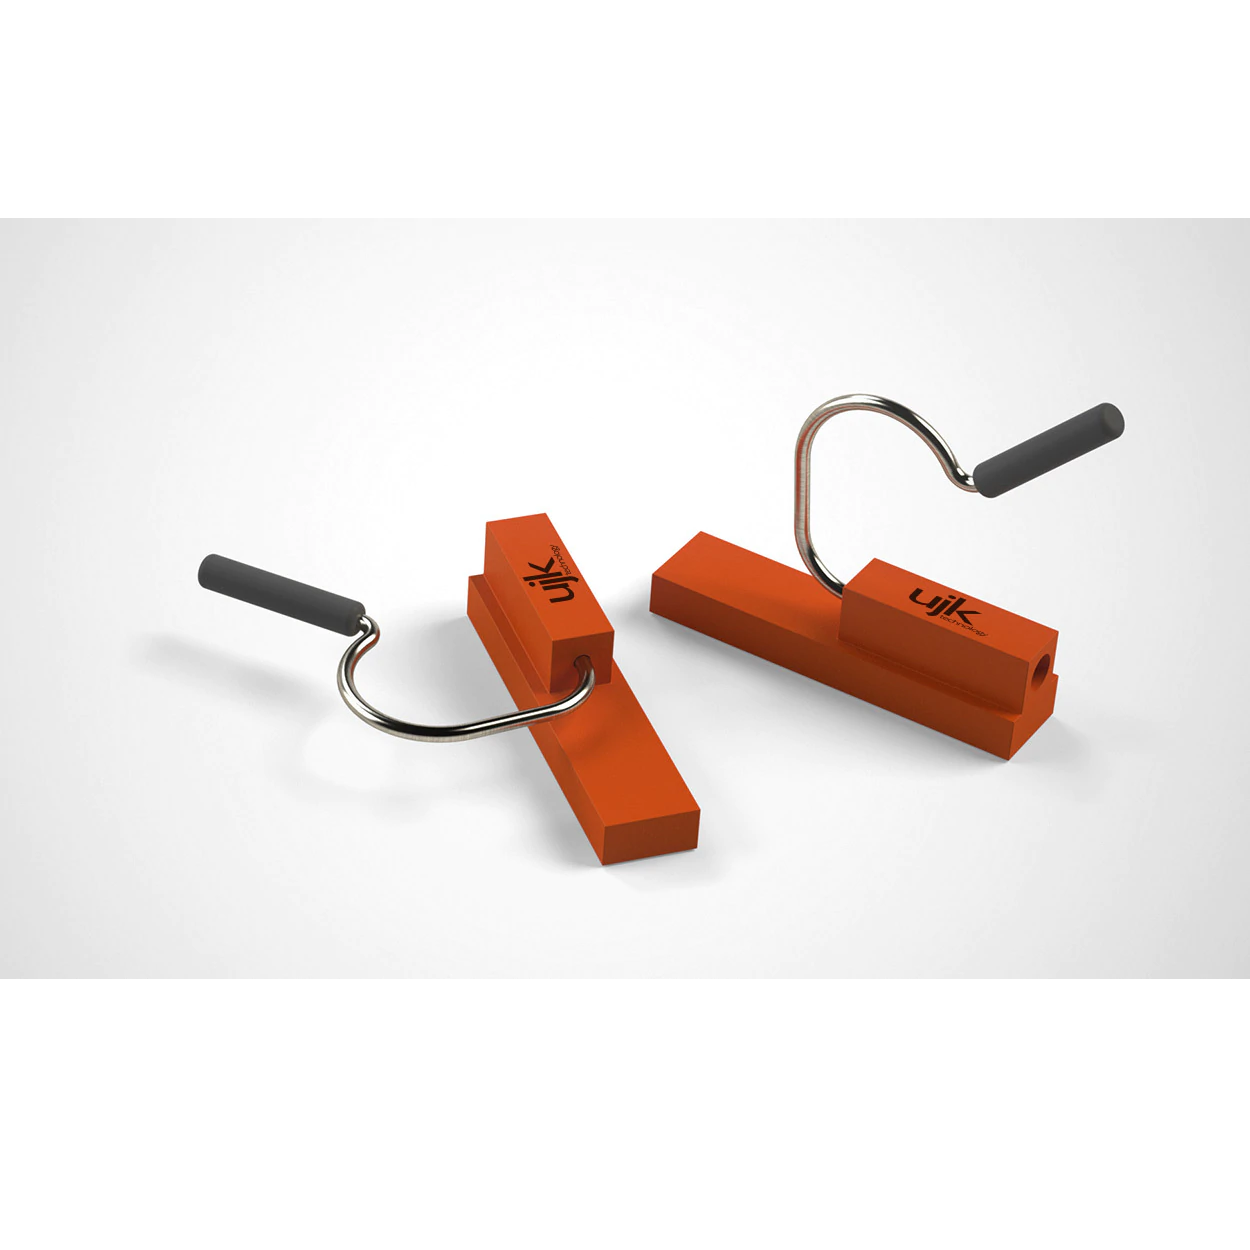 UJK Dog Rail Clips have a plastic body that slides into the t-slot of a guide rail and a metal spring clip with cap.